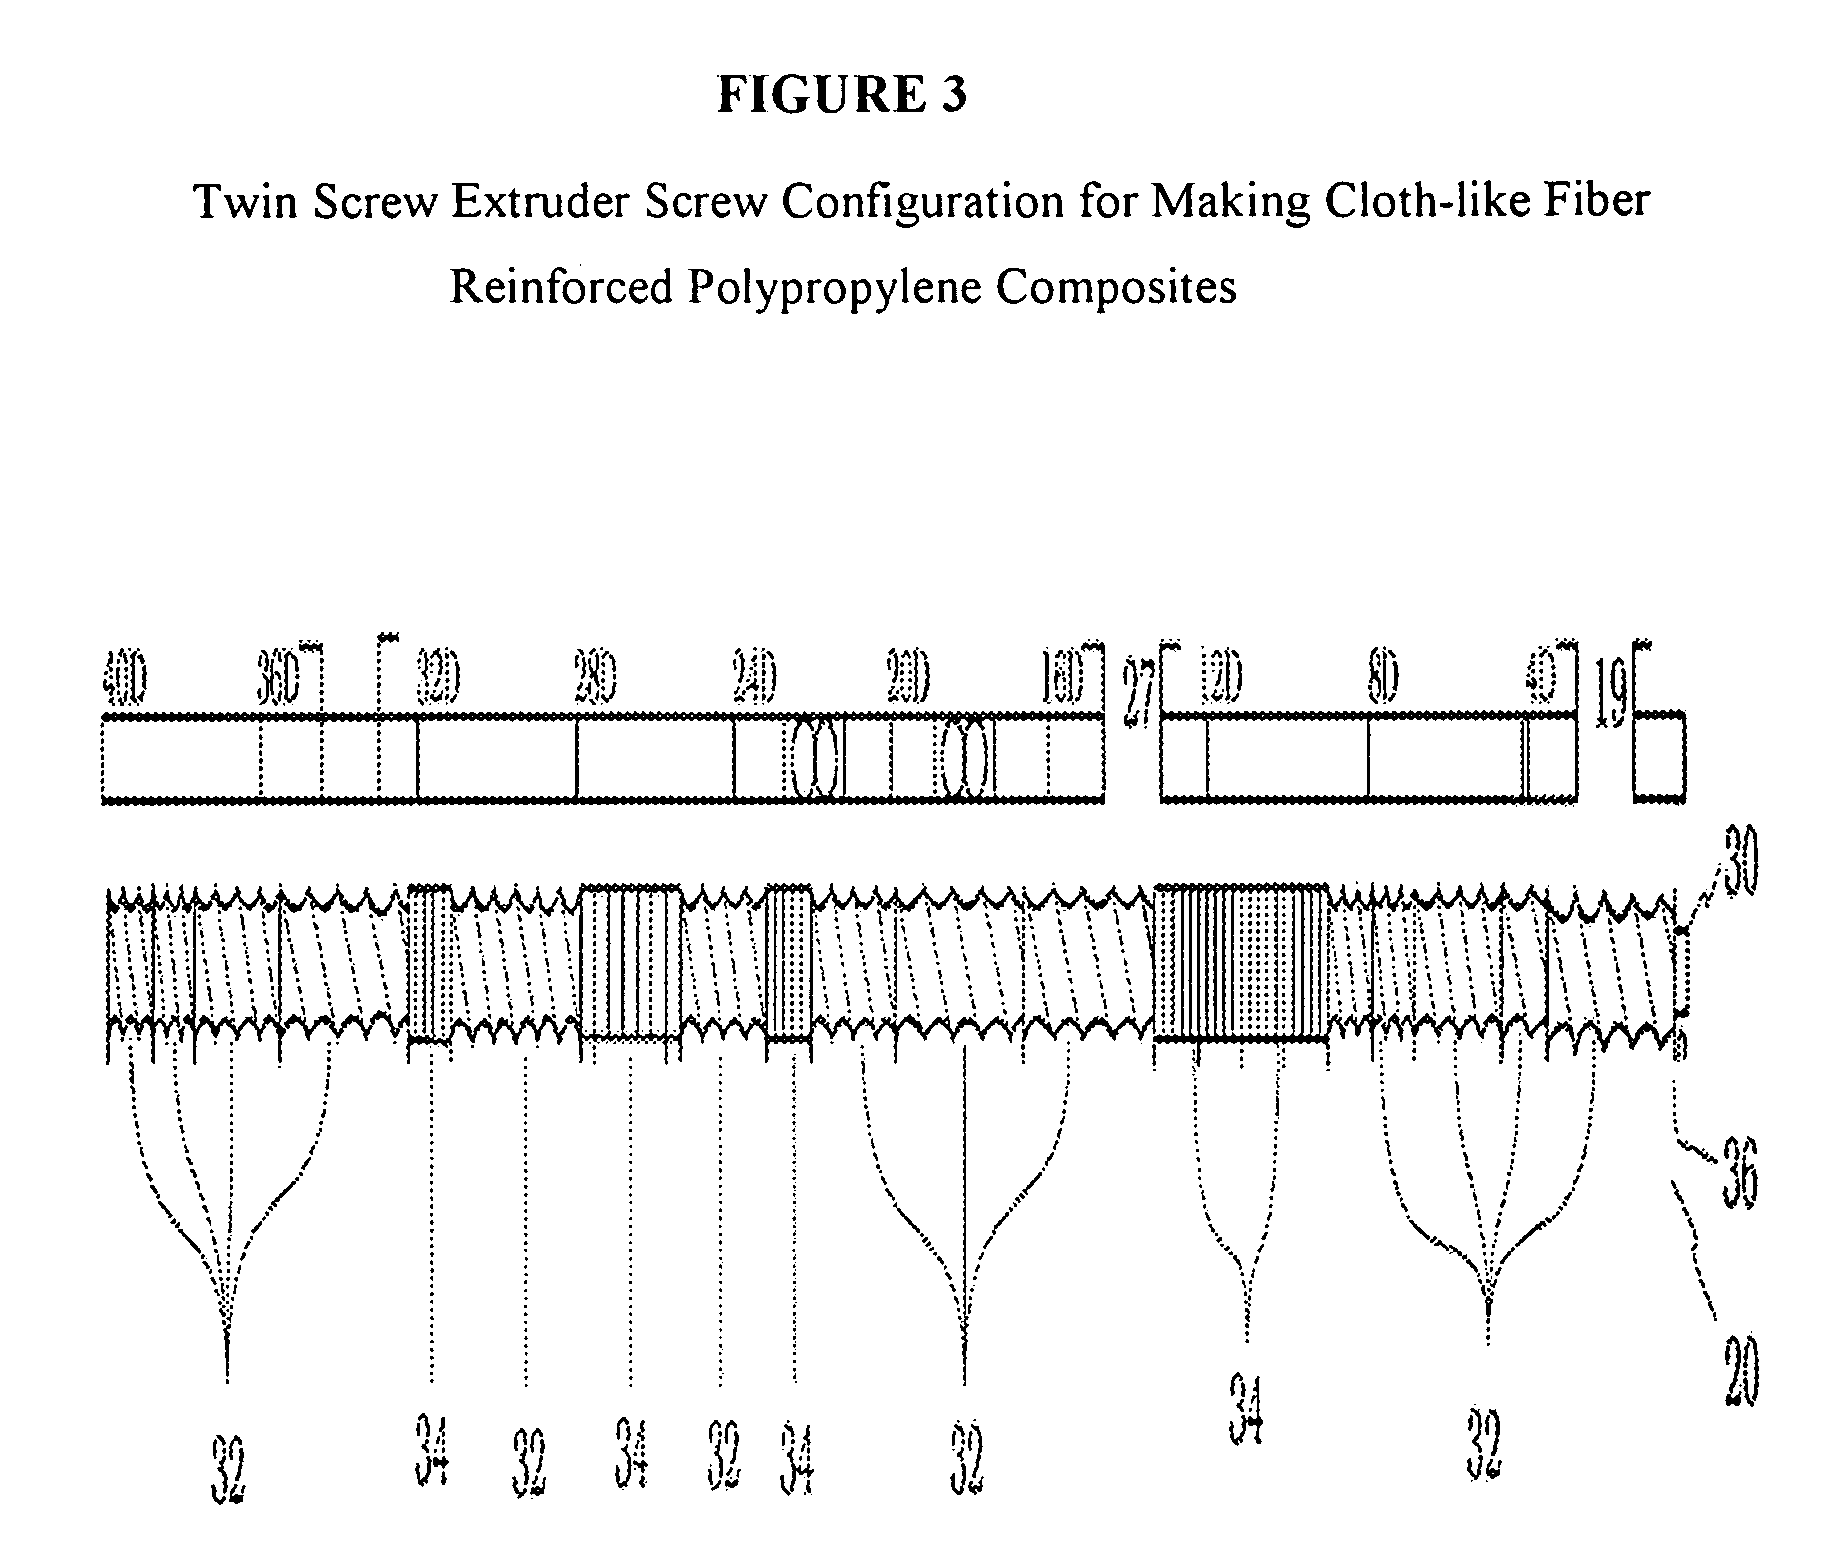 Cloth-like fiber reinforced polypropylene compositions and method of making thereof